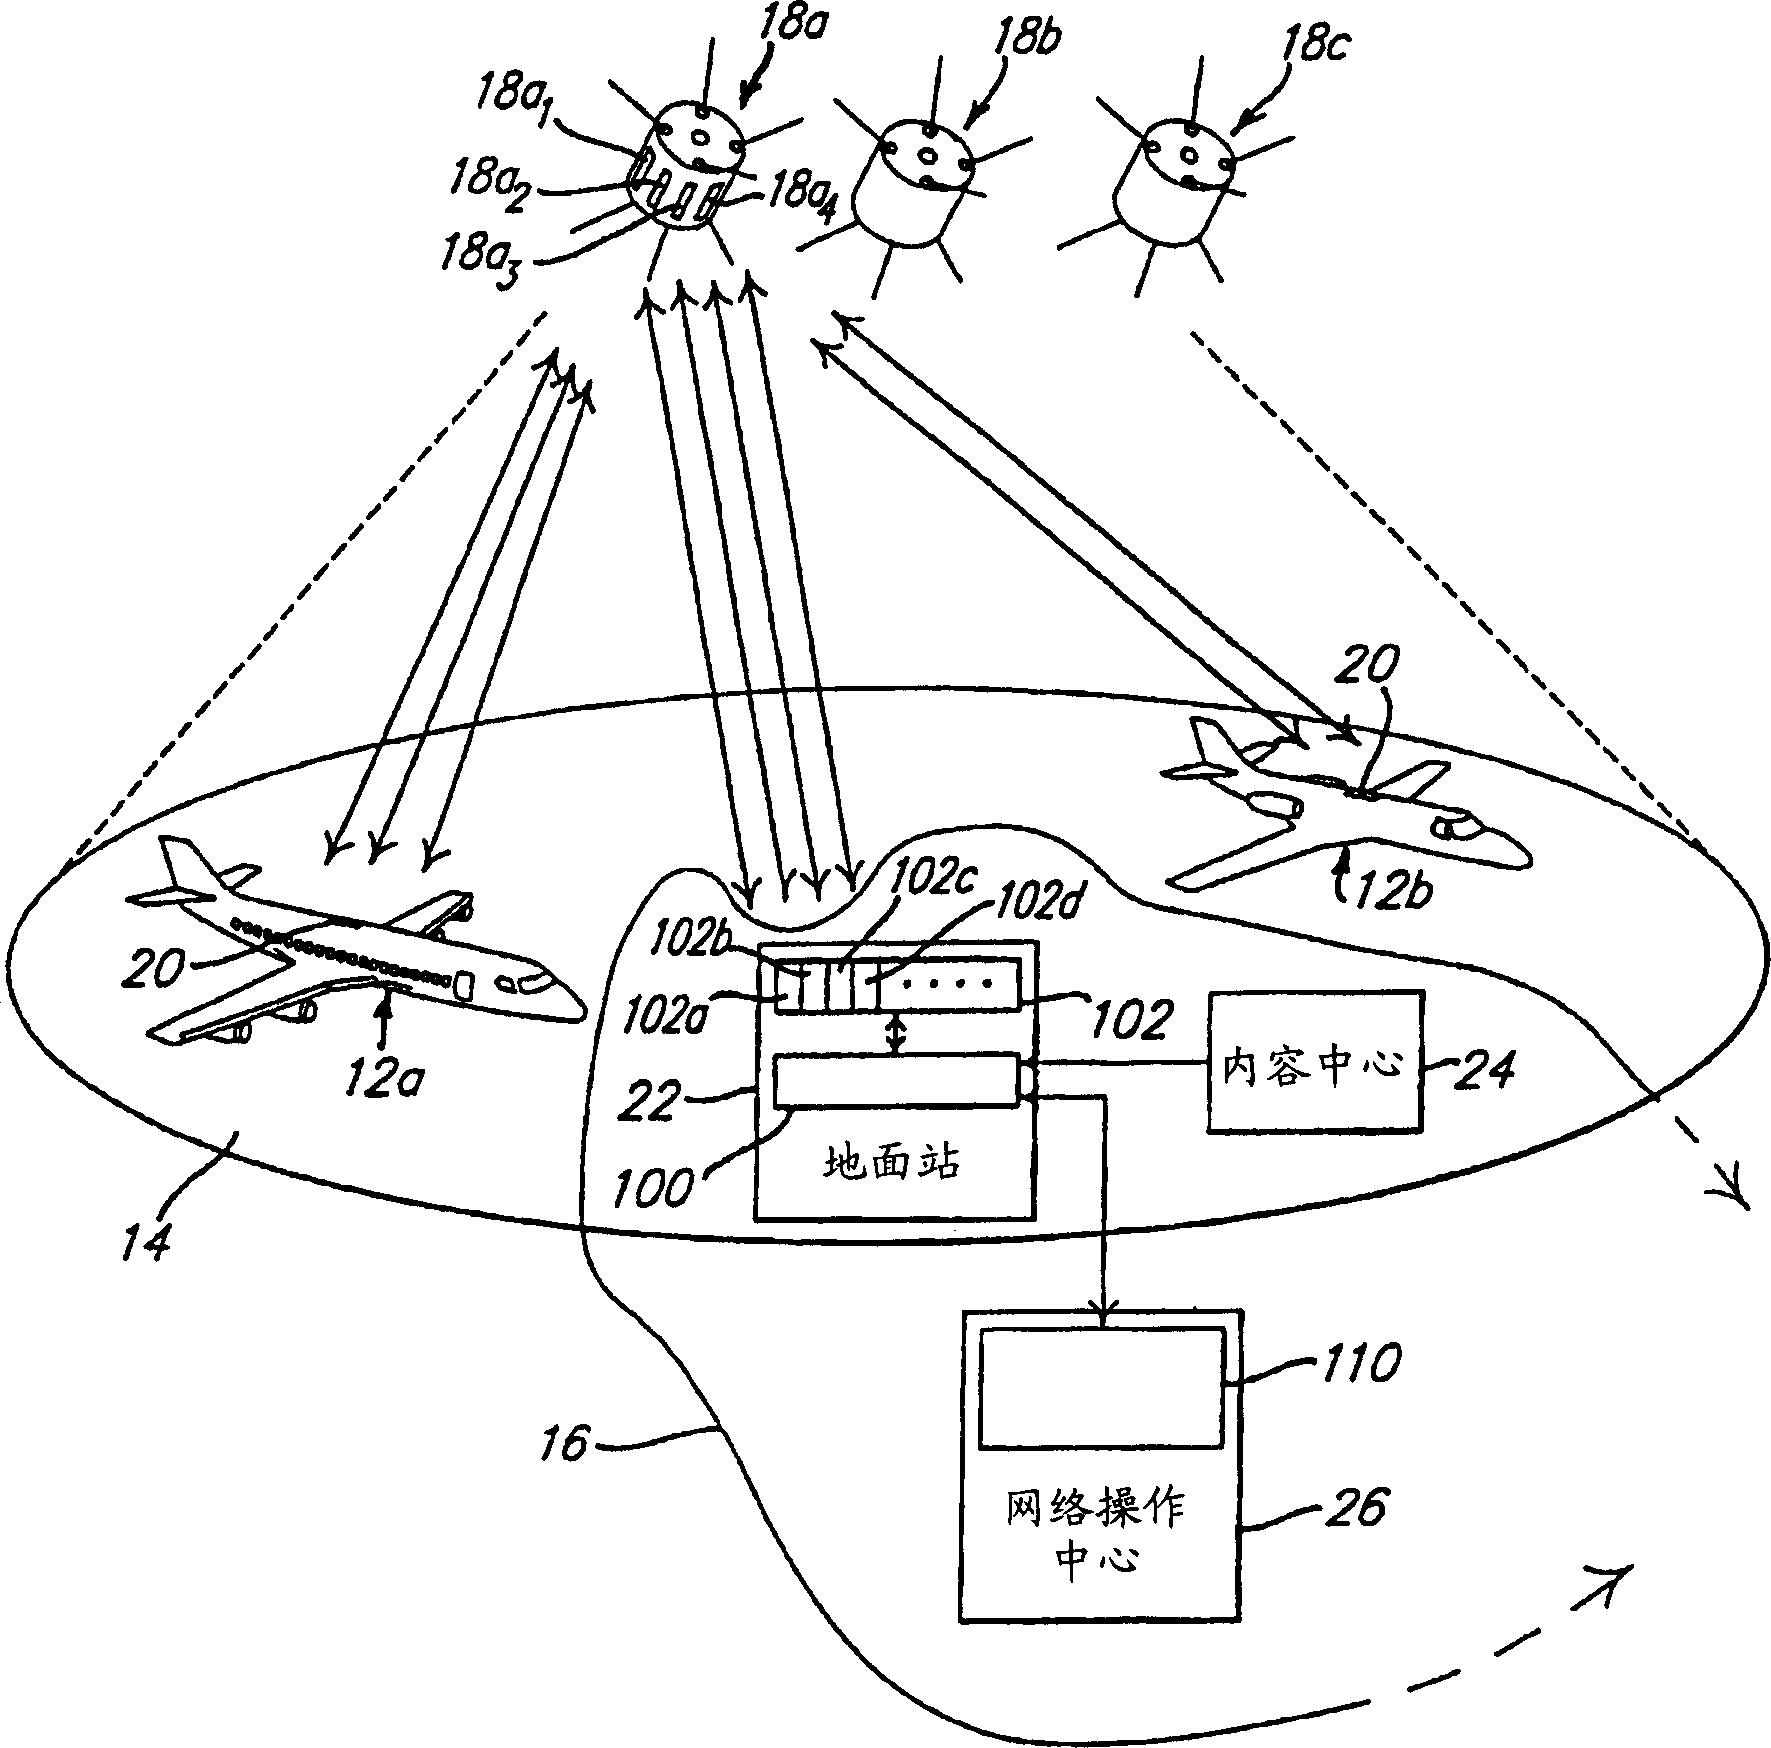 Methods and apparatus for path discovery between a mobile platform and a ground segment